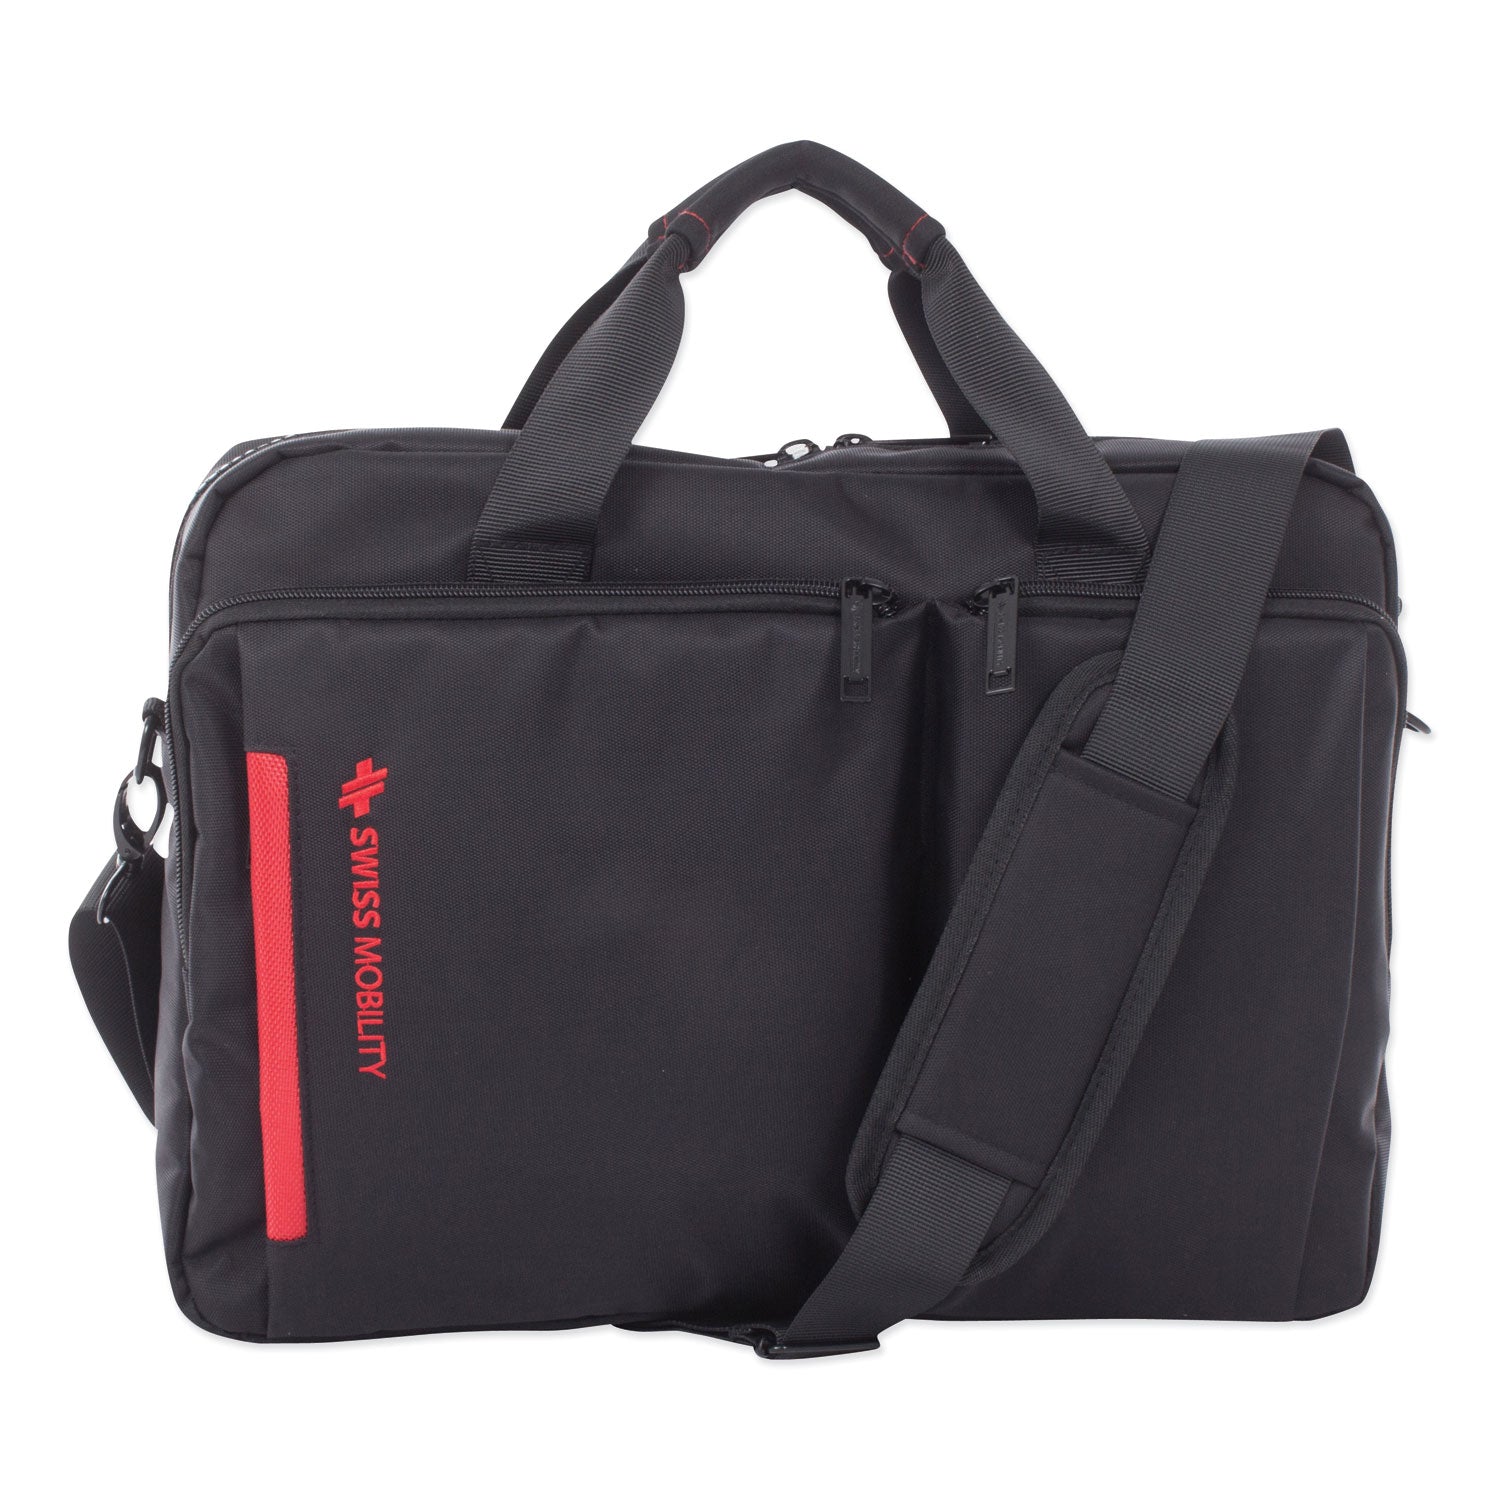 stride-executive-briefcase-fits-devices-up-to-156-polyester-4-x-4-x-115-black_swzexb1020smbk - 1